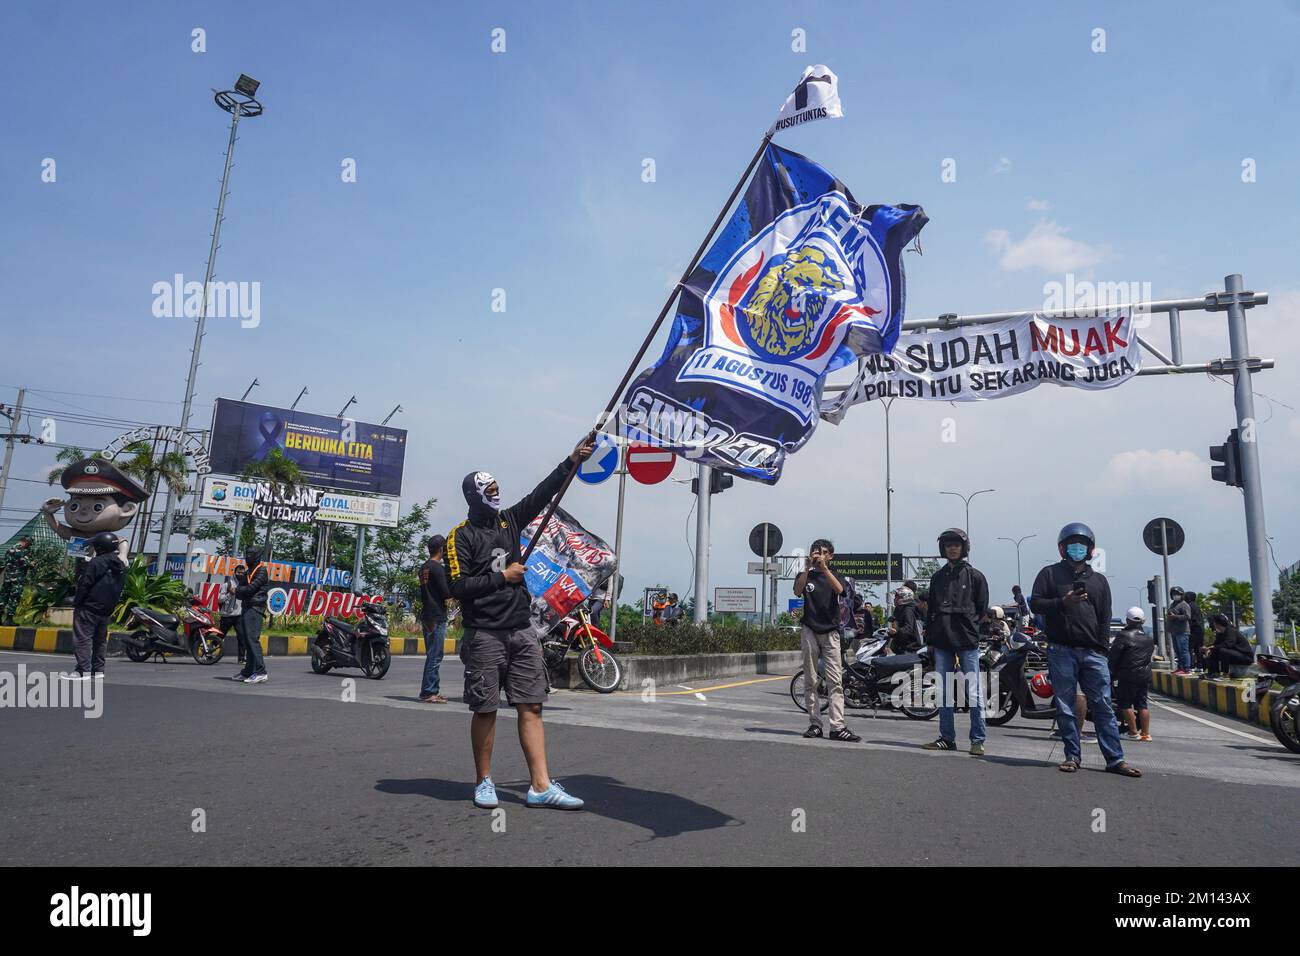 A demonstrator carries a flag with the Crazy Lion logo of the soccer team Arema FC, during the protest. Aremania, the supporters of Arema FC, held a rally and blocked streets in some spots in Malang to protest the legal process of the soccer stampede tragedy, which killed 135 people due to the police tear gas at Kanjuruhan Stadium on October 1, 2022. (Photo by Dicky Bisinglasi / SOPA Images/Sipa USA) Stock Photo